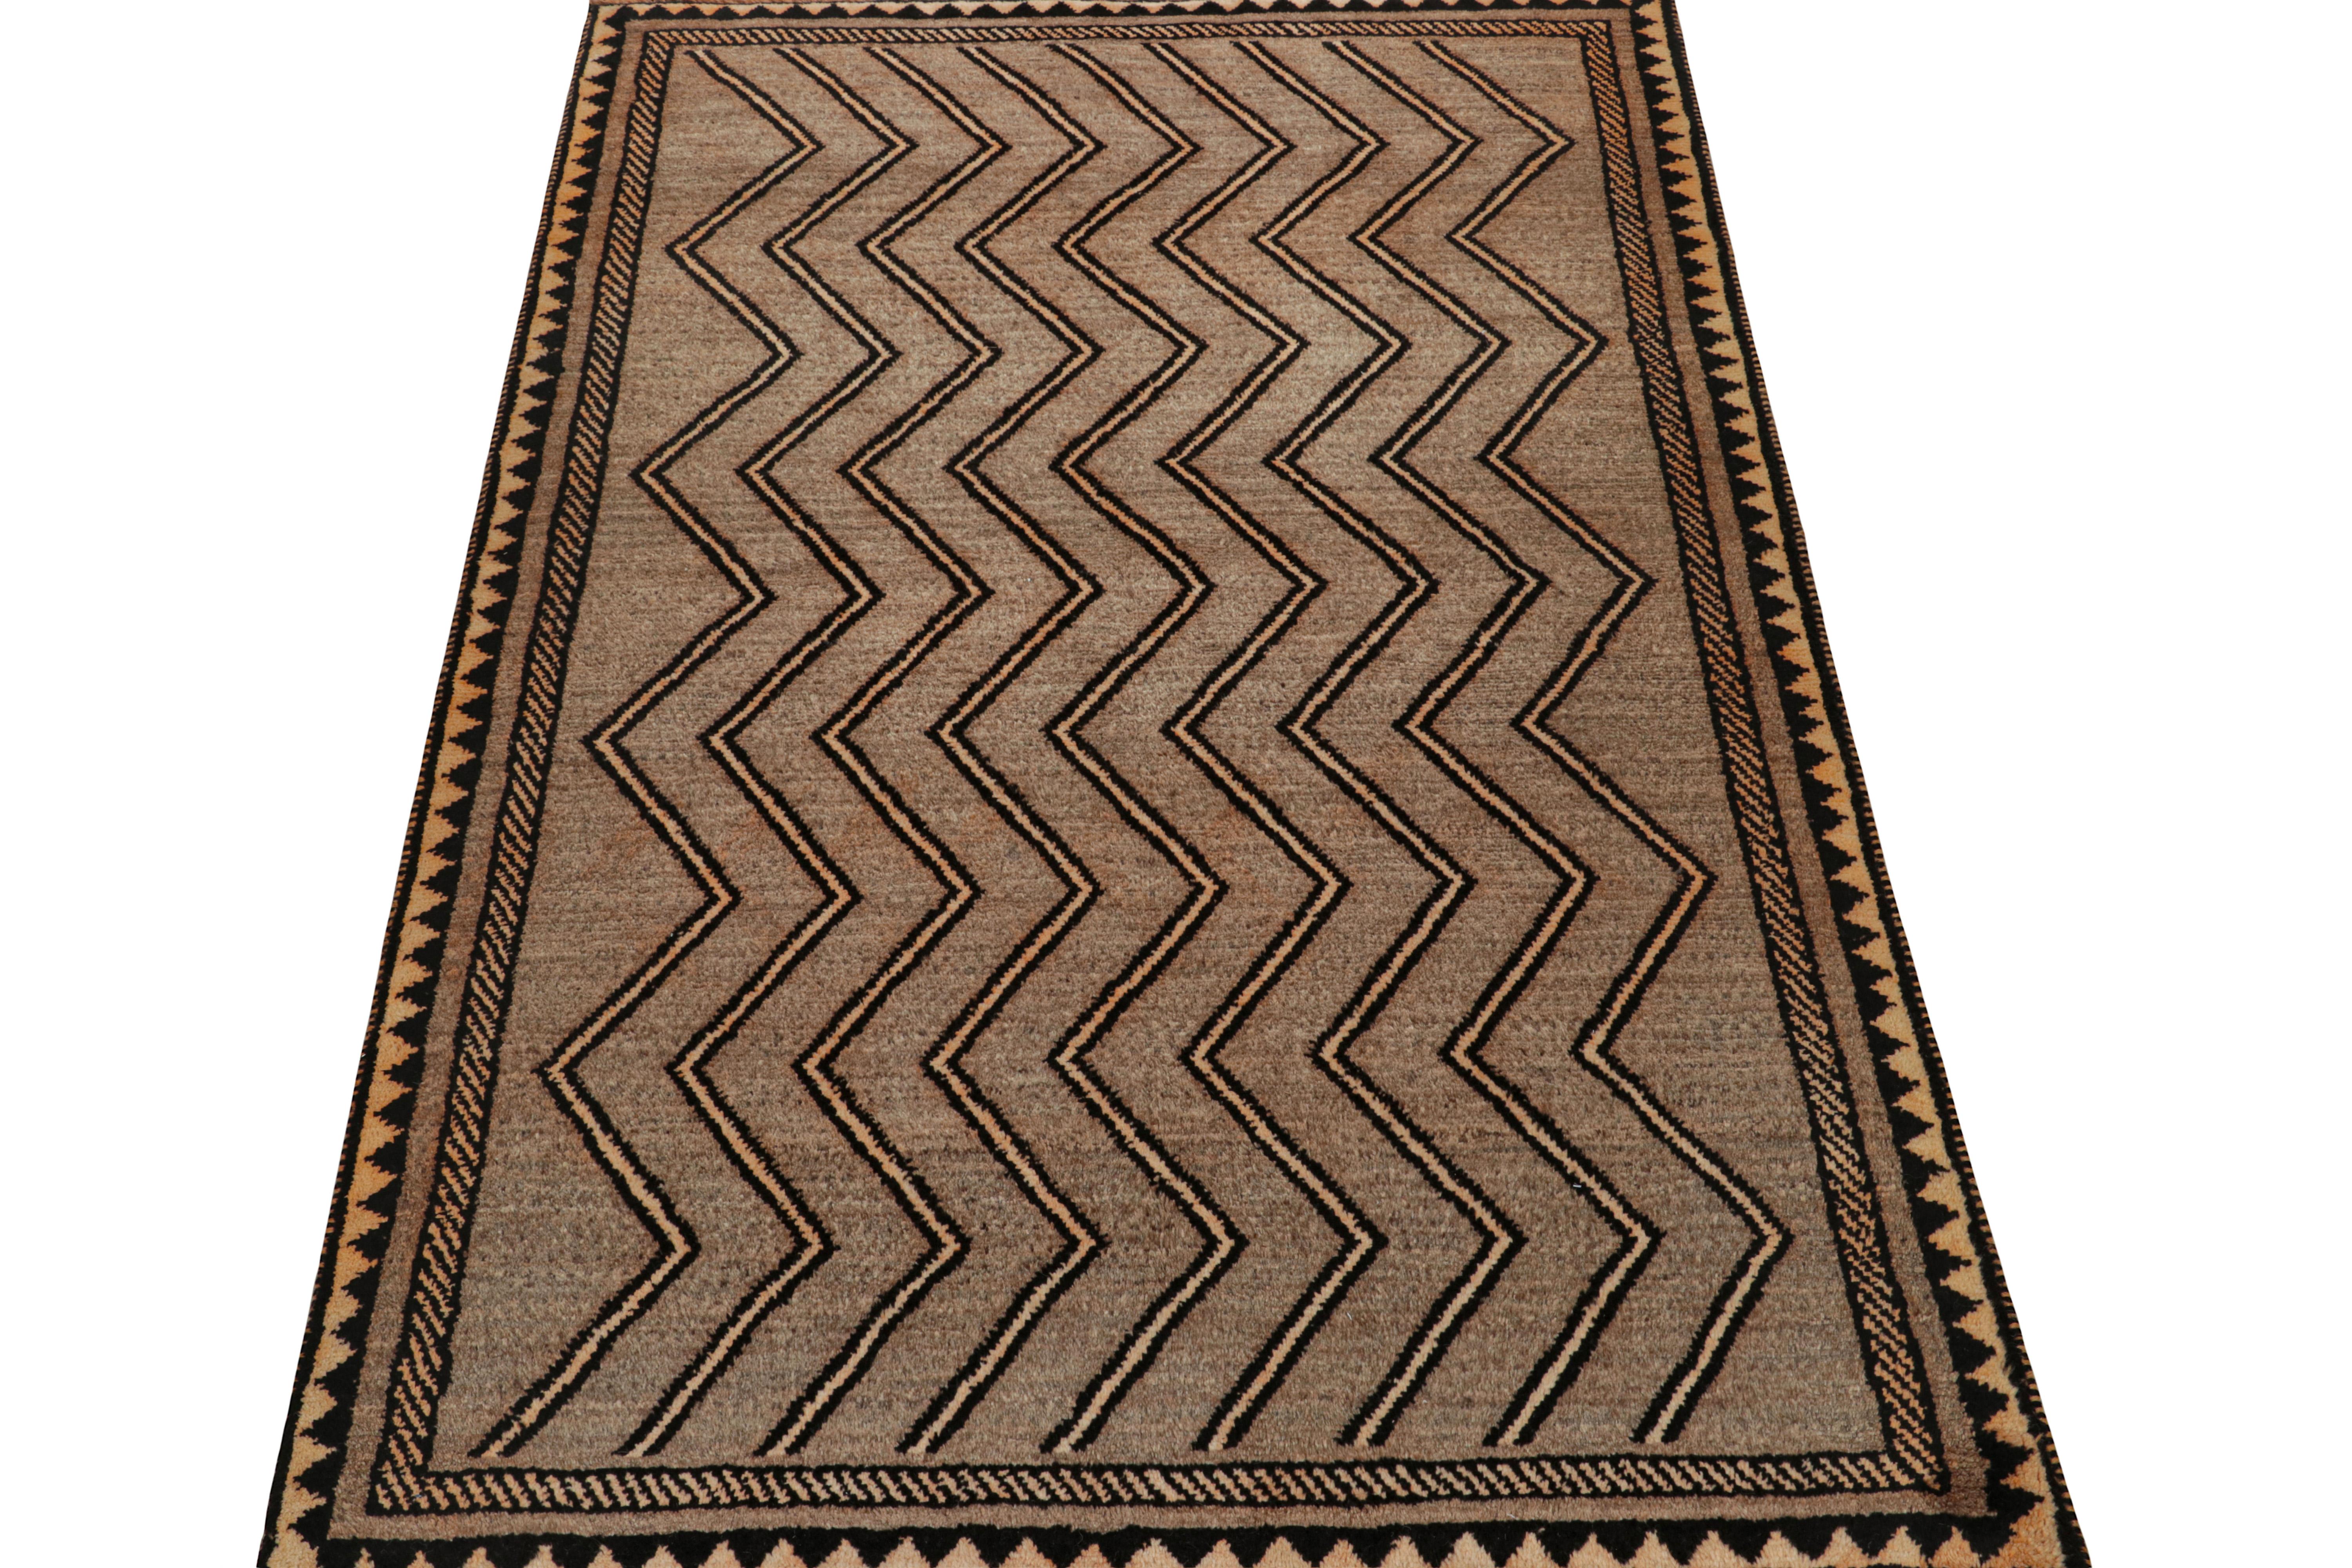 Indian Vintage Gabbeh Tribal Rugs in Beige with Chevron Patterns - by Rug & Kilim For Sale